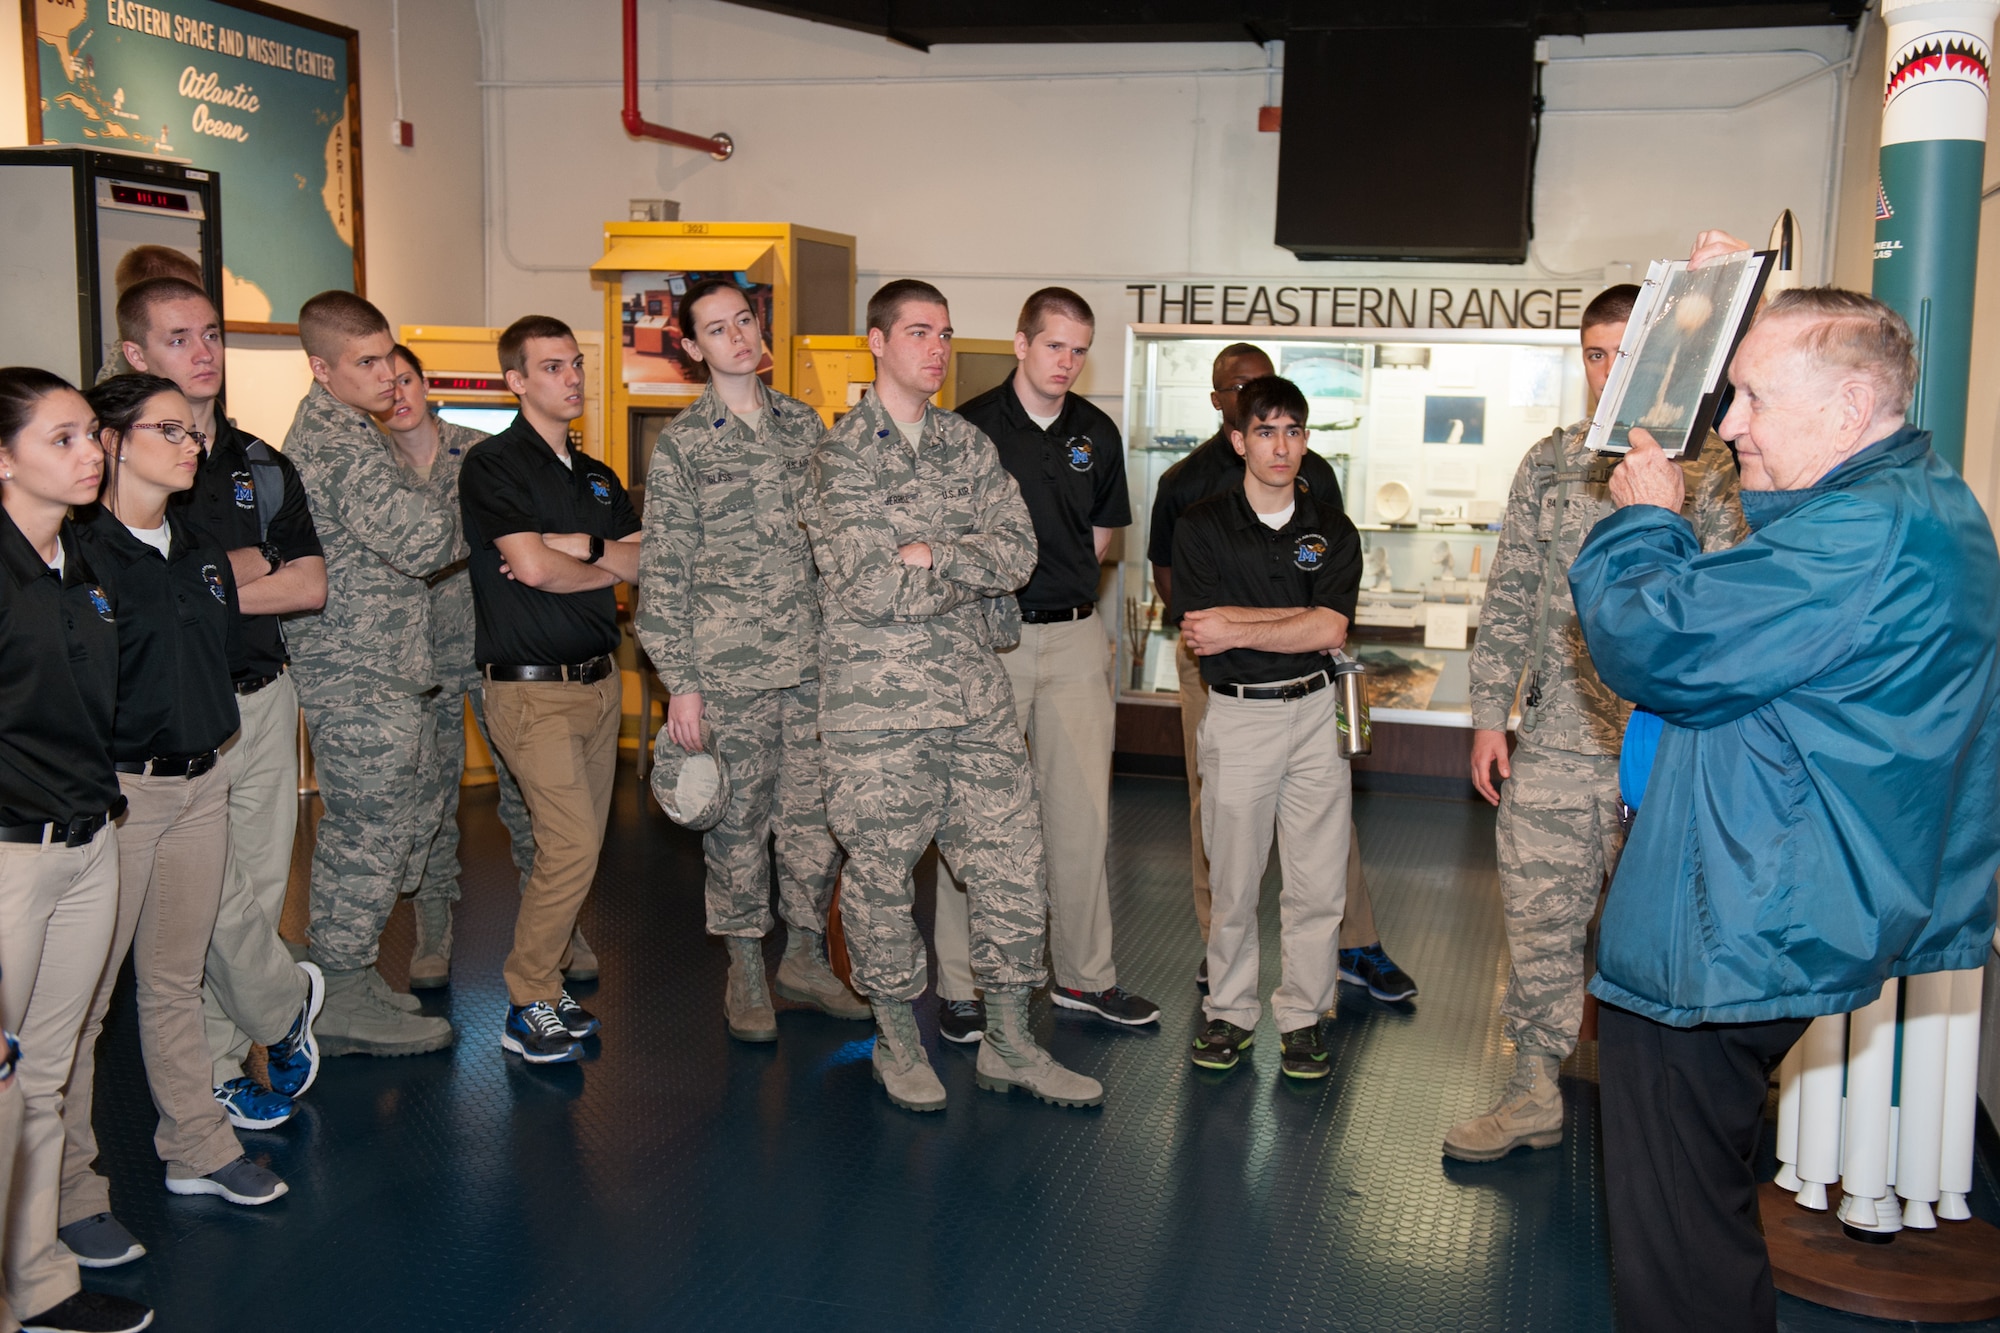 Members of the University of Memphis Air Force ROTC Detachment 785 visited Patrick Air Force Base and Cape Canaveral Air Force Station, Fla., and received a firsthand look at the 45th Space Wing’s mission and day-to-day operations, March 7, 2016. The cadets’ visit exposed them to a real-world Air Force environment and provided them the opportunity to see how base components work together to meet the mission. (U.S. Air Force photo/Benjamin Thacker) (Released)  